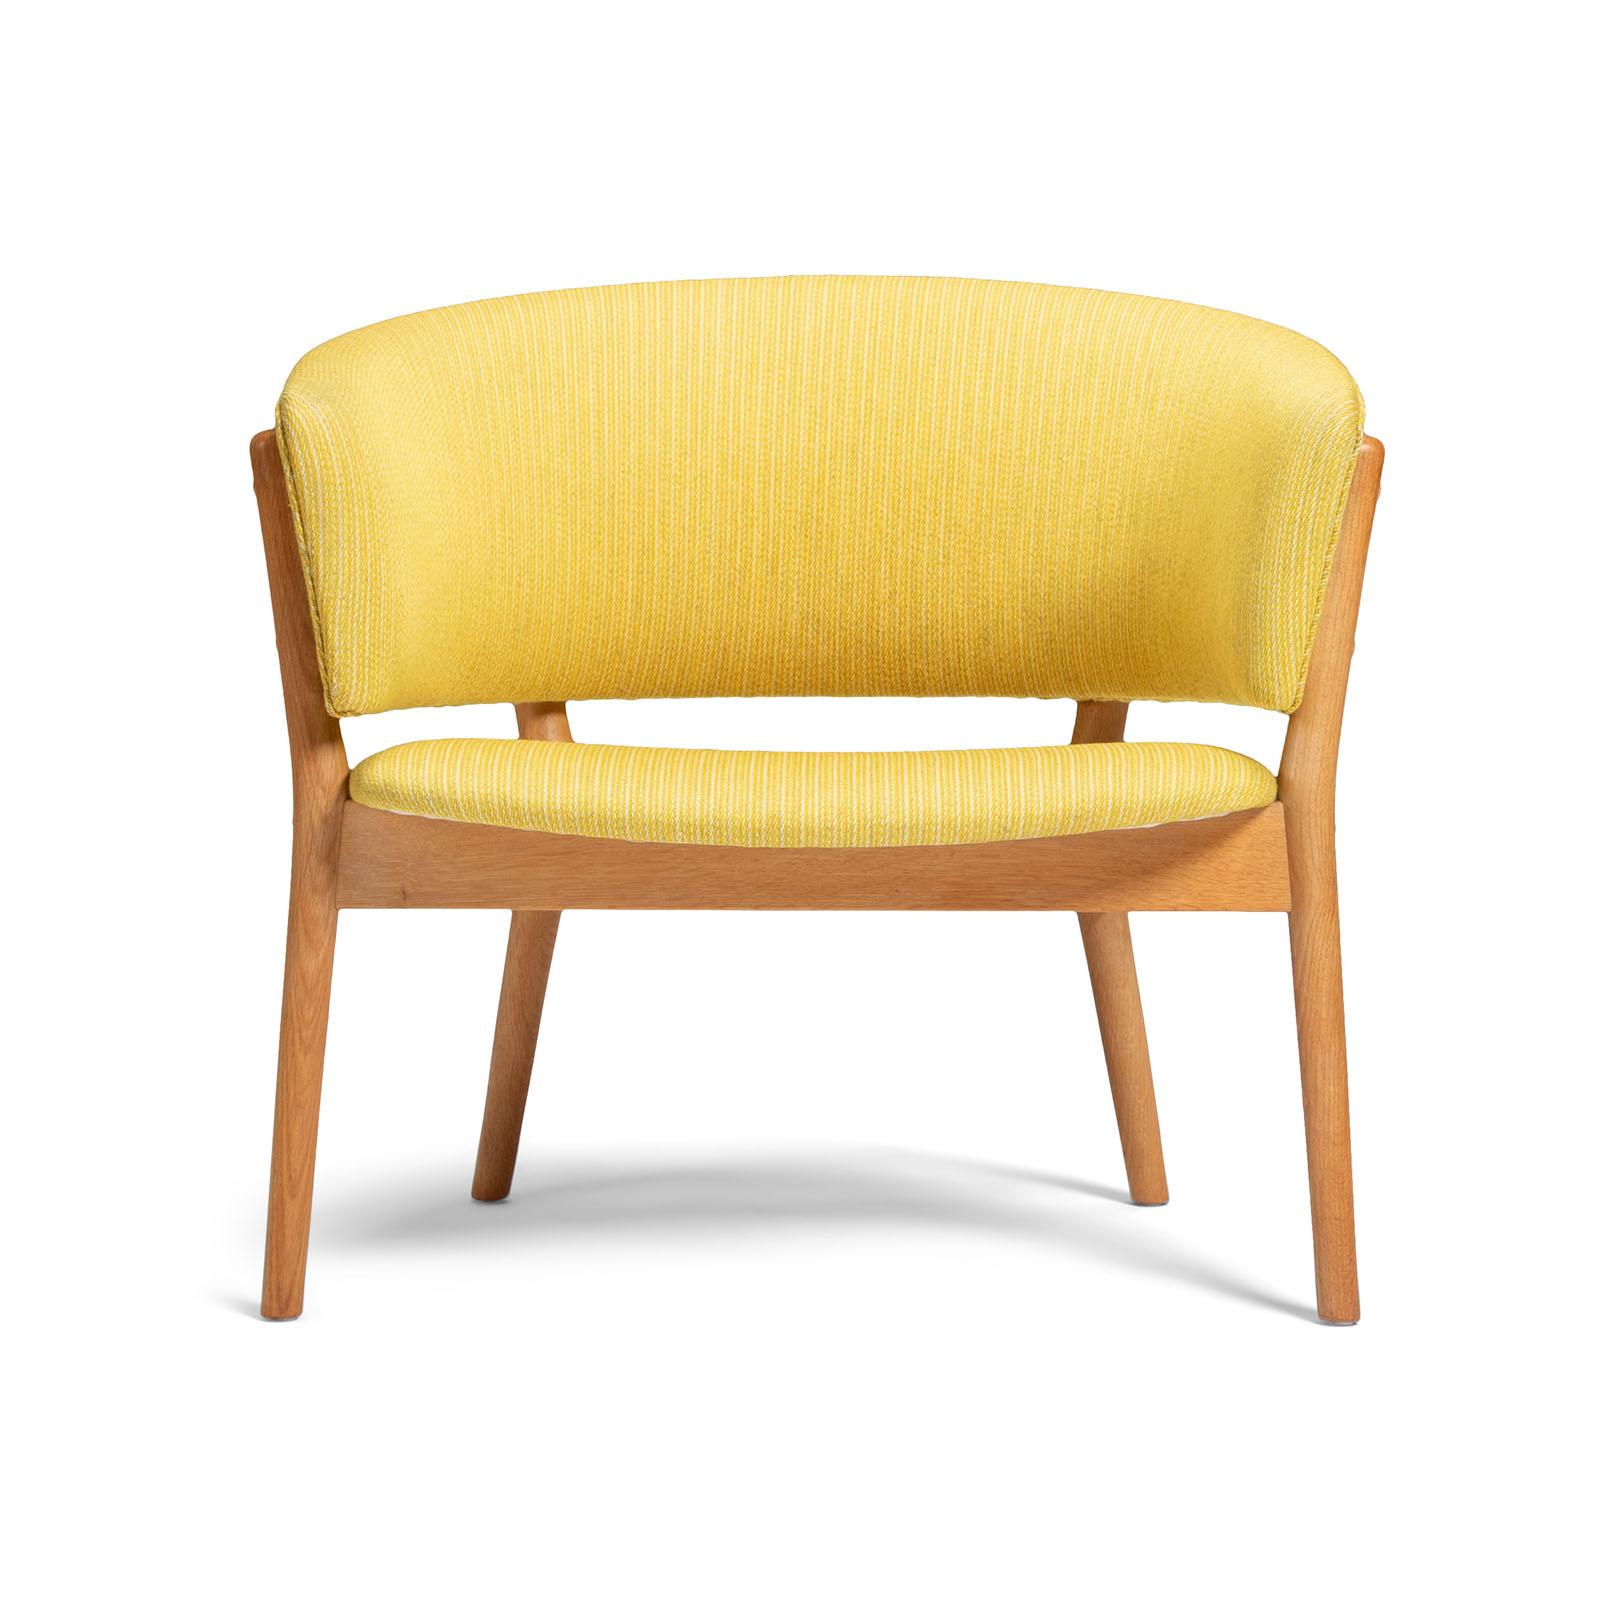 A lovely easy chair with an exposed frame in solid oak, upholstered in original yellow textile. 
Designed by Nanne Ditzel in 1952. Made by cabinetmaker Søren Willadsen, Denmark.